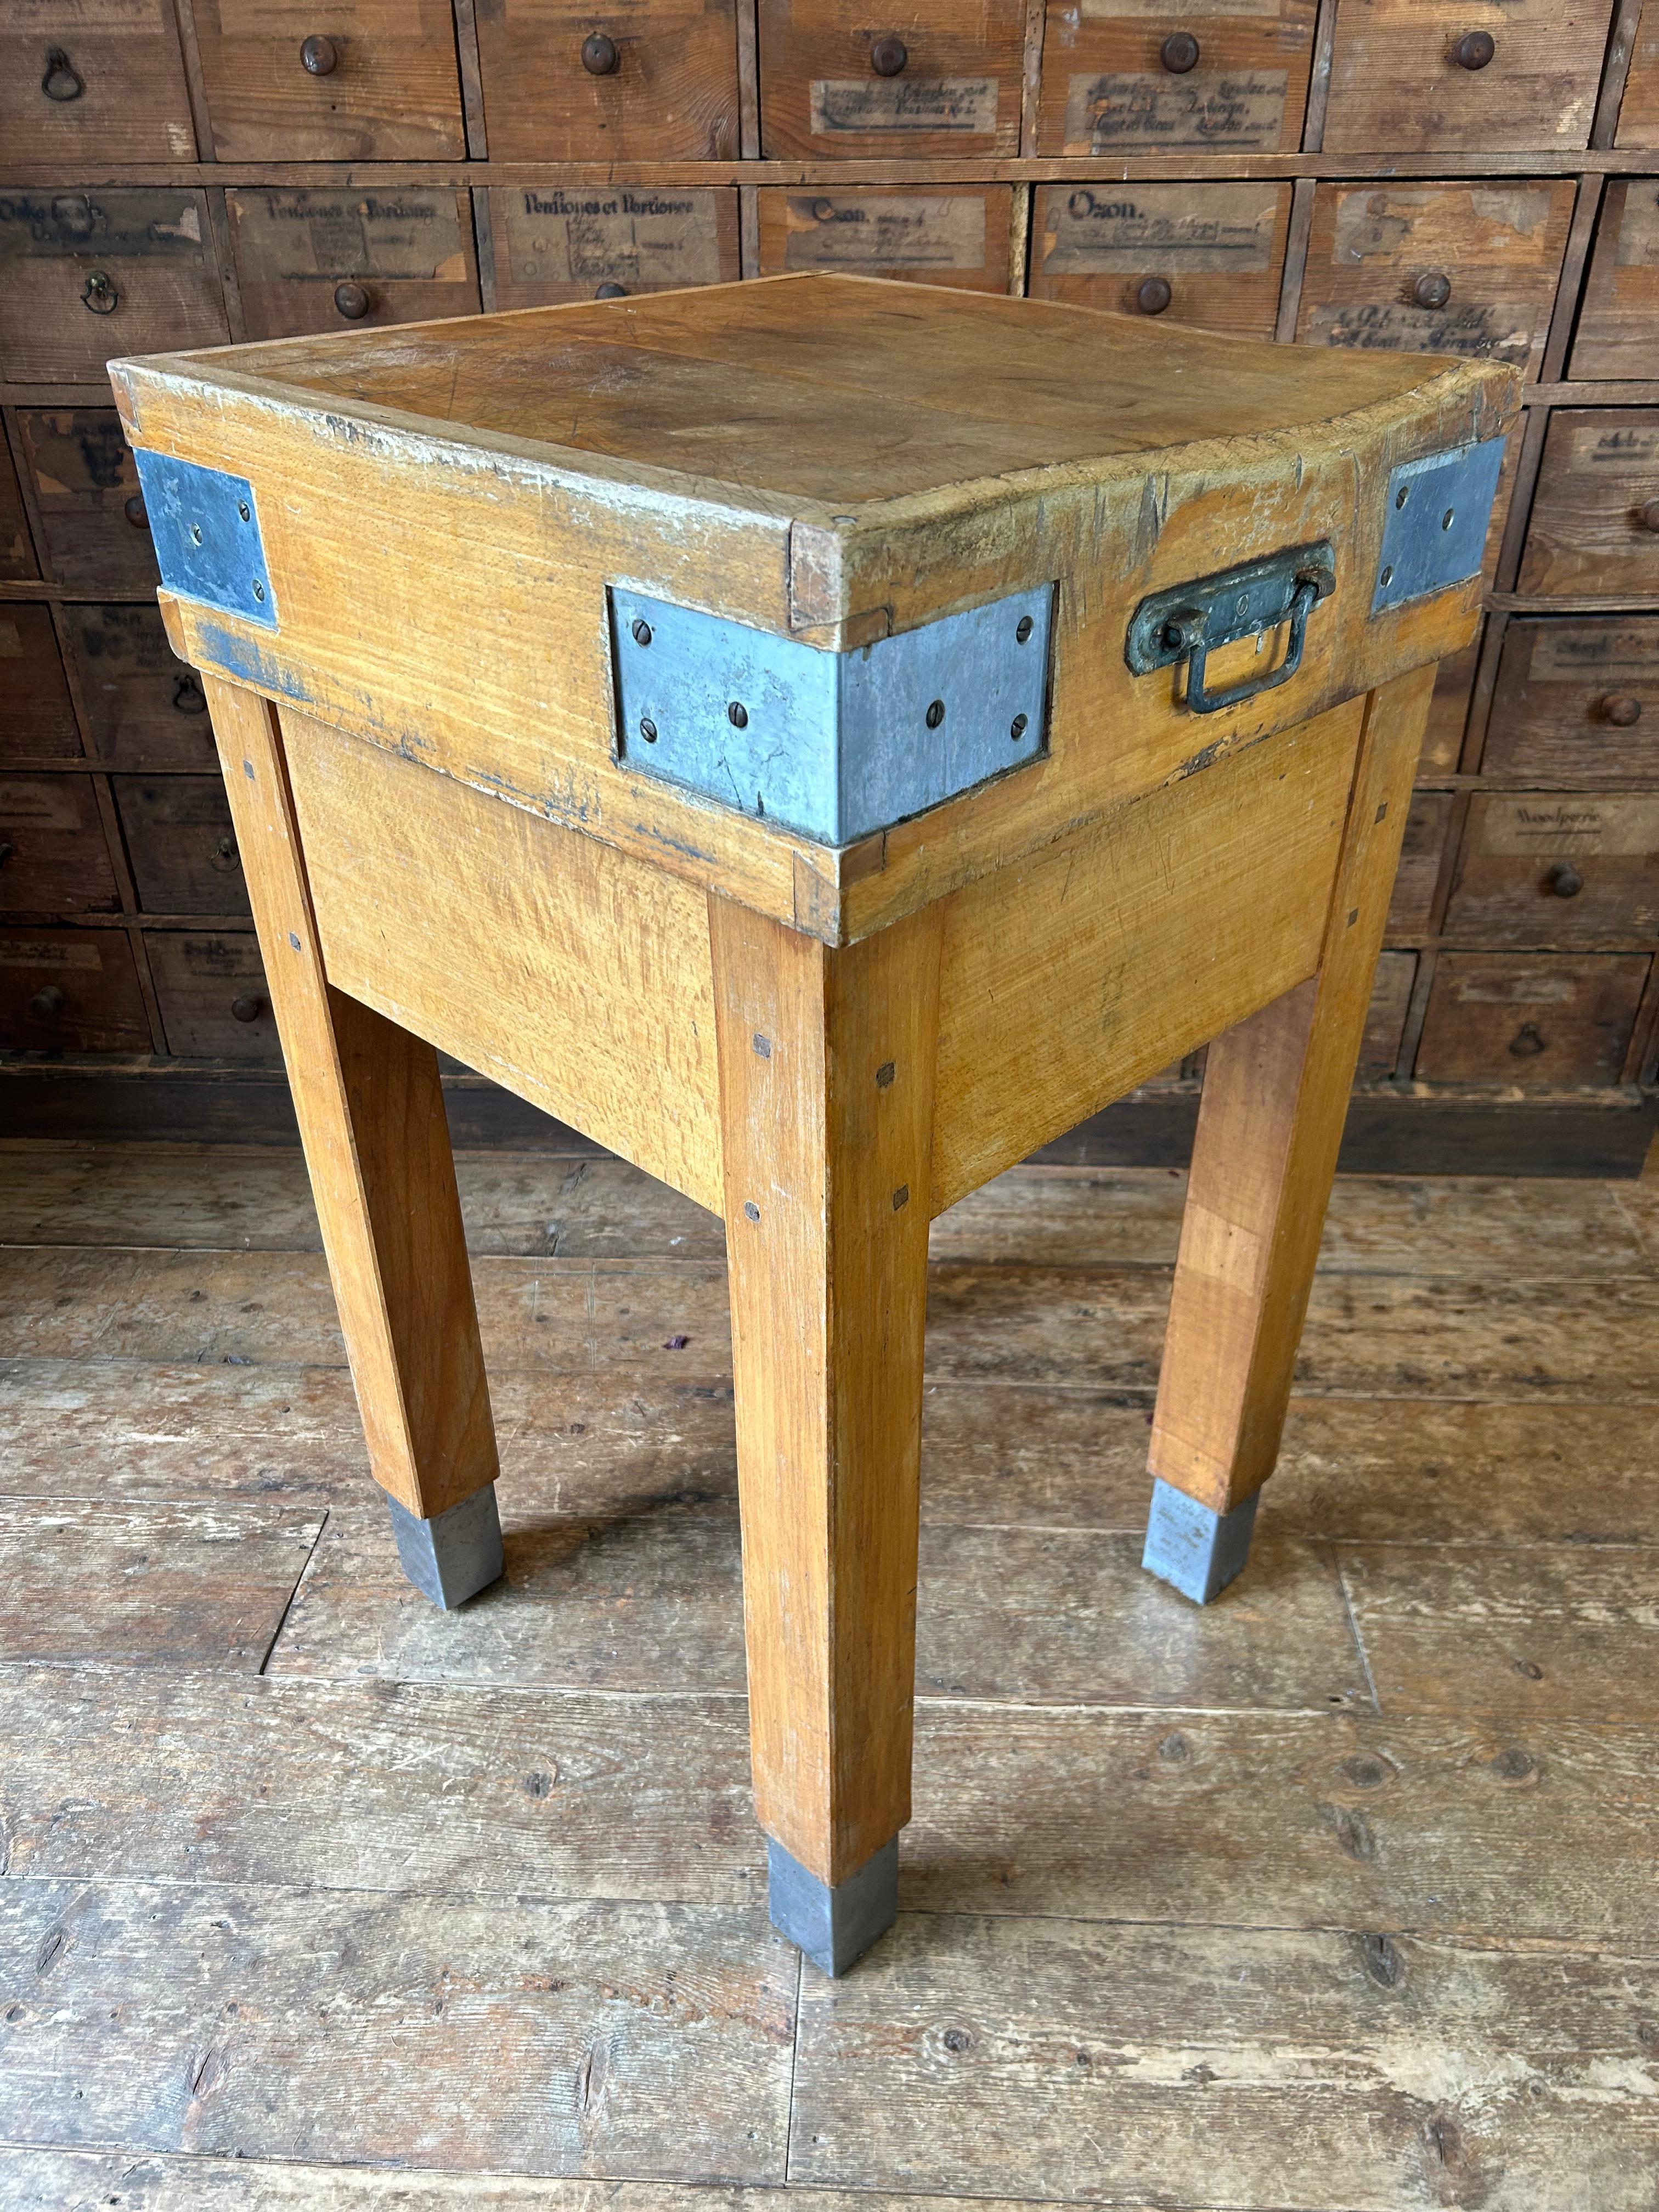 An original English vintage beech butchers block table made in the 1950’s. The block consists of two parts which come apart if required. The top has been constructed with end grained blocks of beech and a side grain perimeter.  The sides have 4